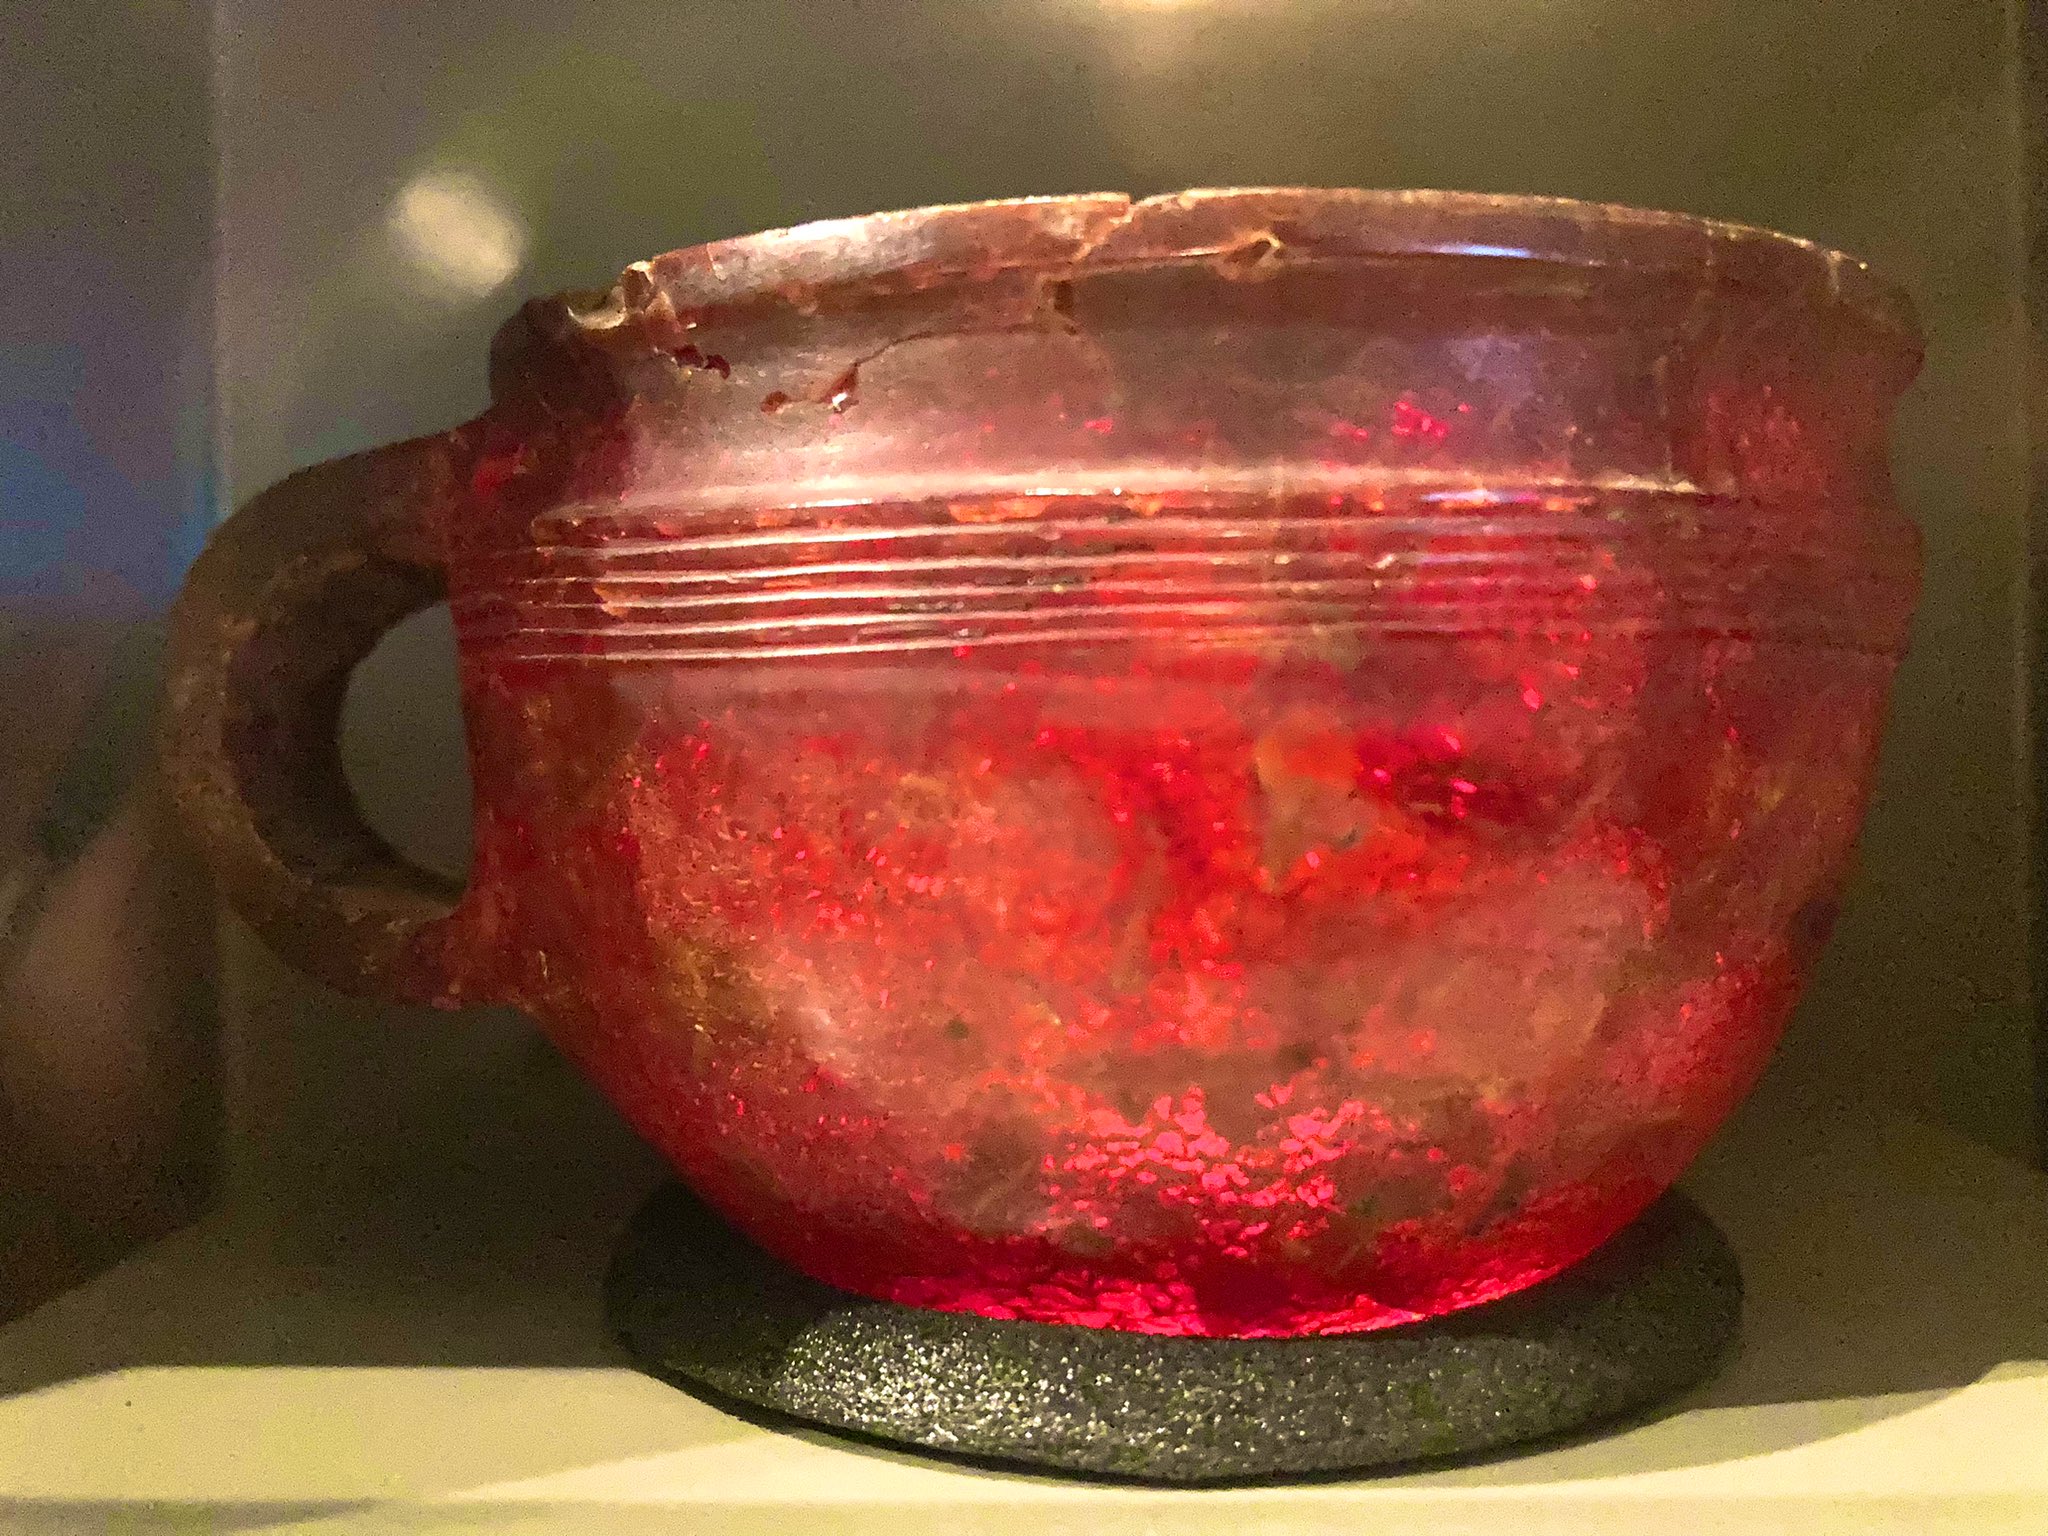 Alison Fisk on X: "The Hove Amber Cup is an extremely rare Bronze Age  vessel carved from a single piece of Baltic amber about 3,500 years ago.  This ancient and beautiful cup